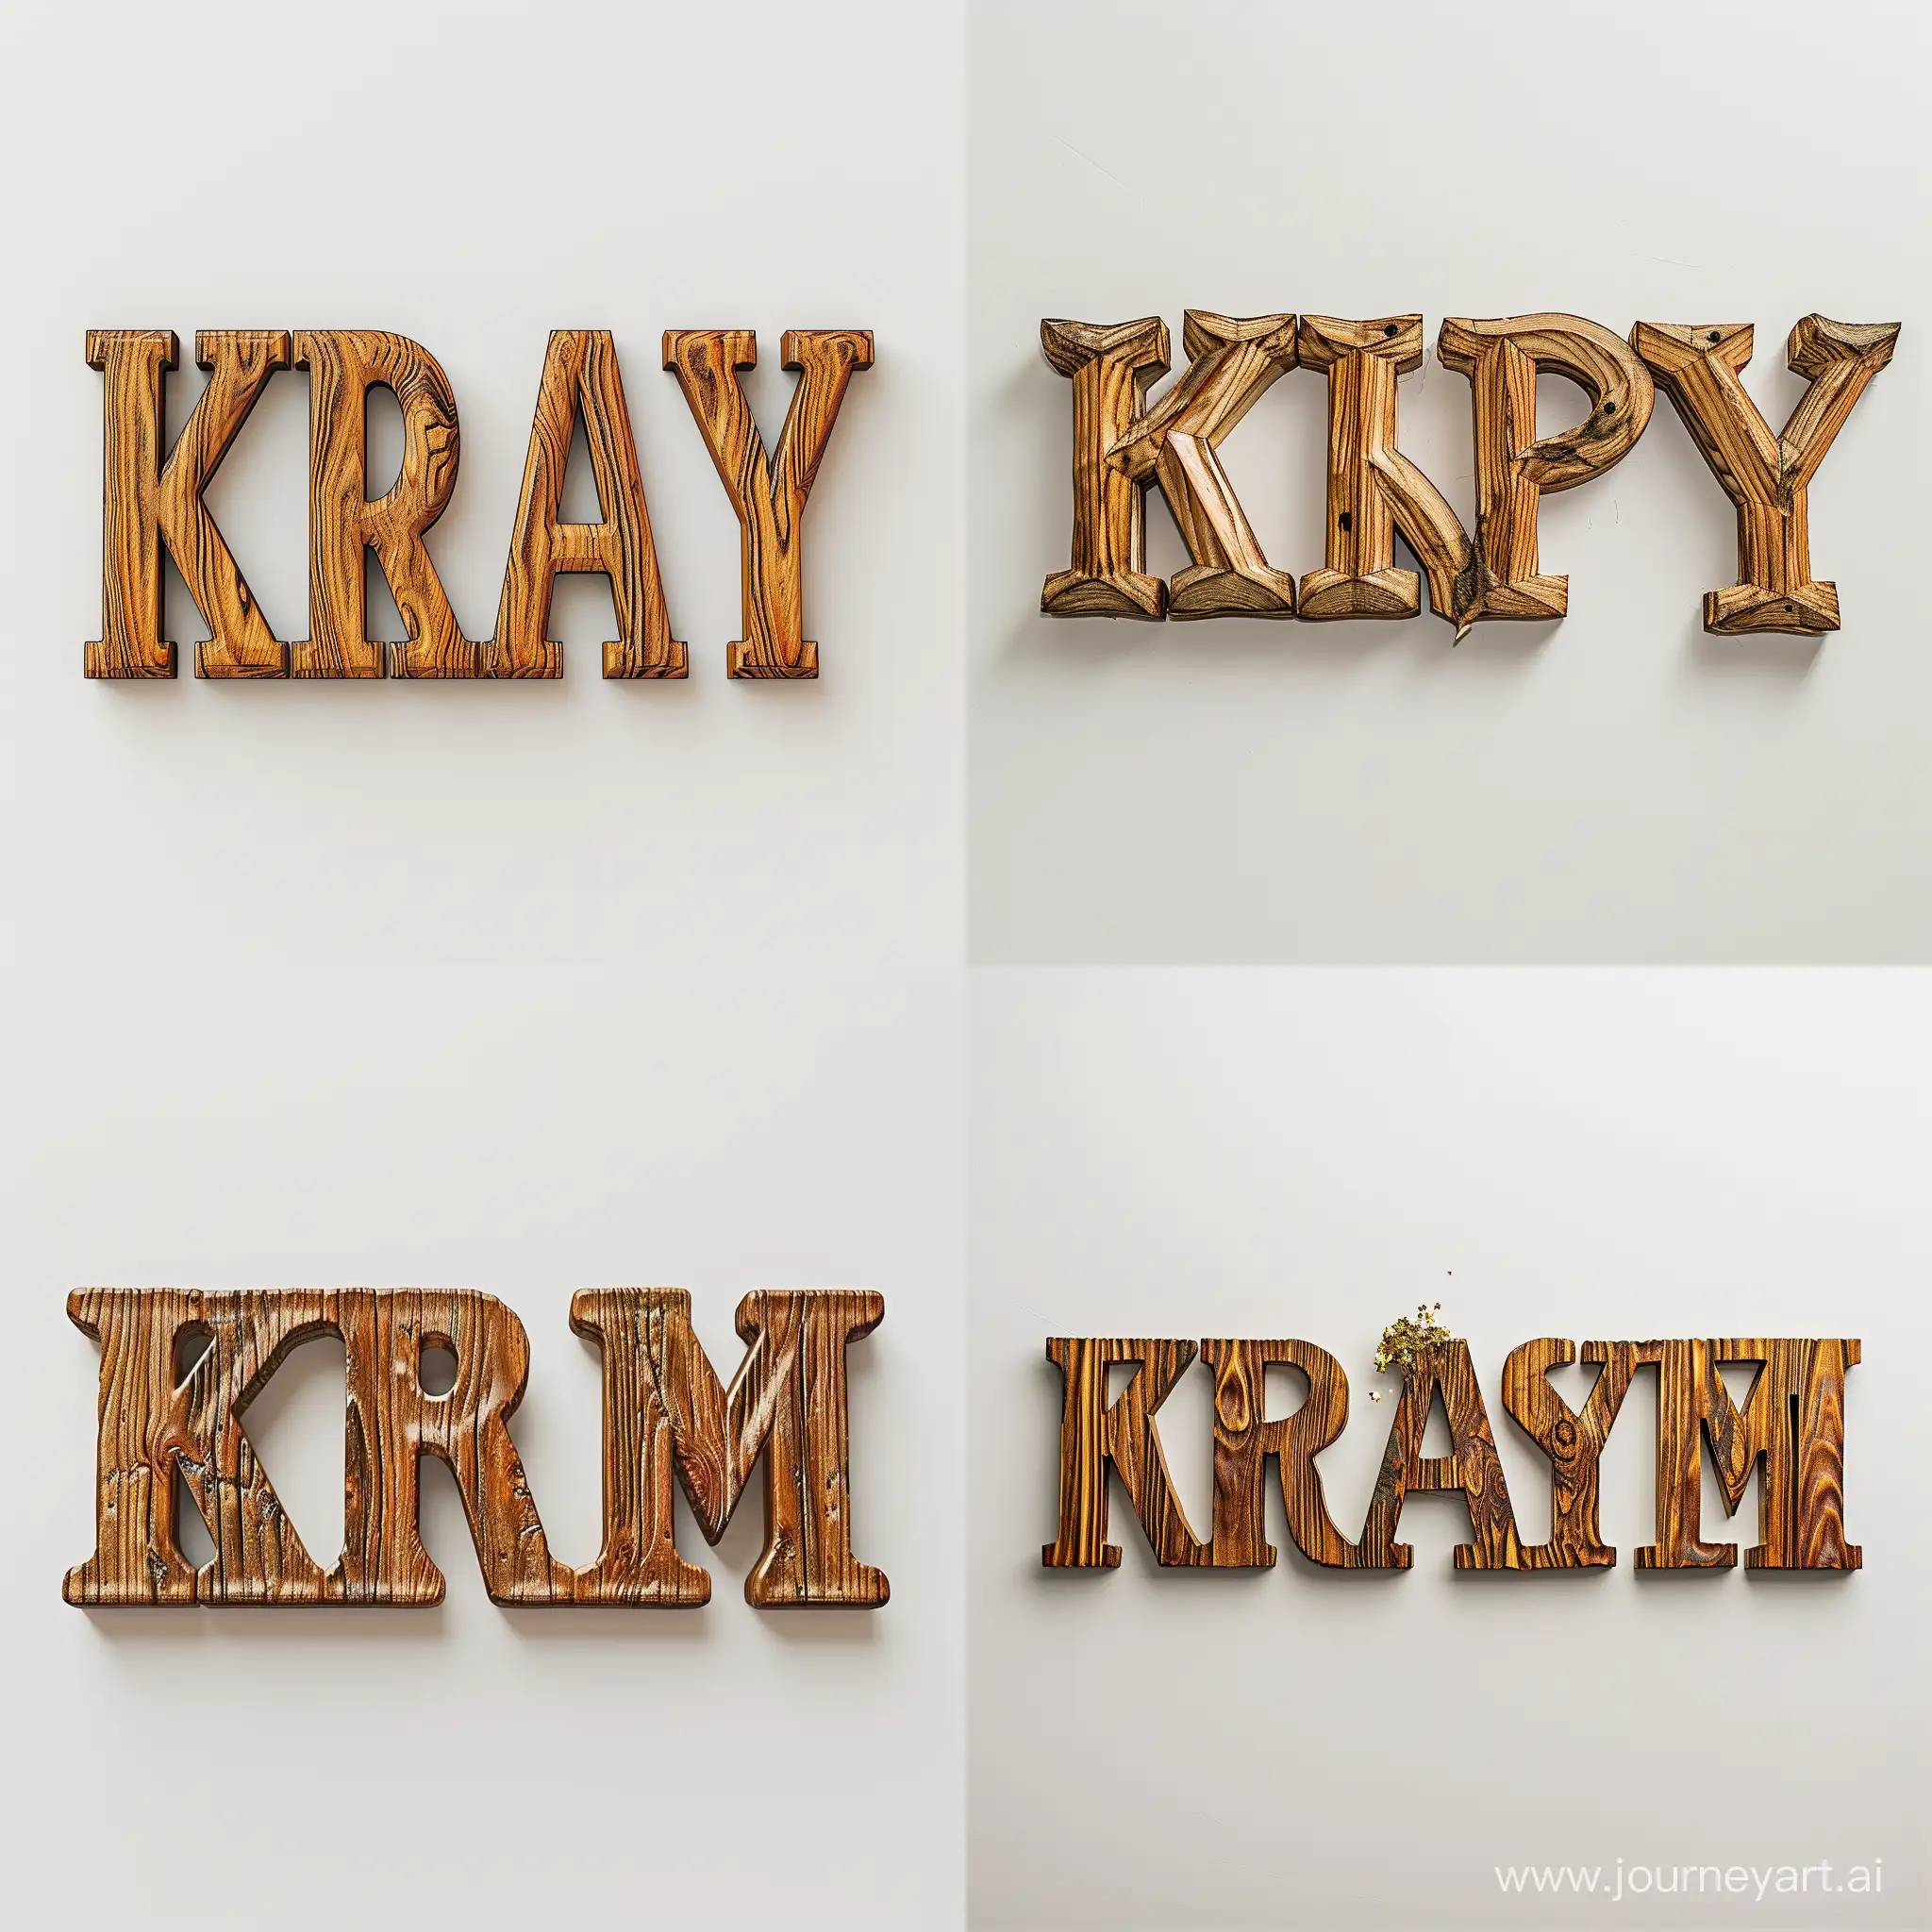 Elegant-Extruded-Wooden-Text-K-R-A-S-Y-M-I-R-on-Clean-White-Background